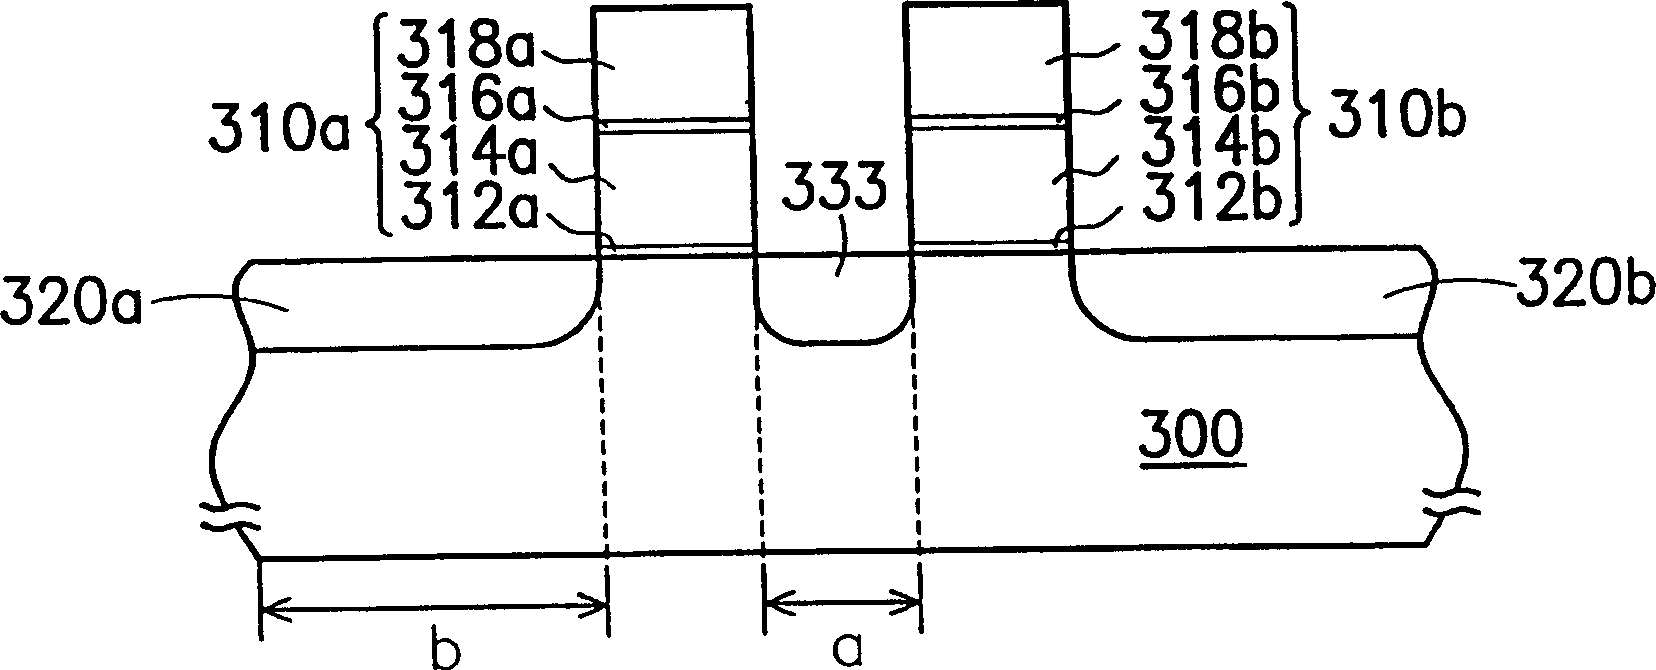 Structure and read-write method of double-bit non-volatile memory unit